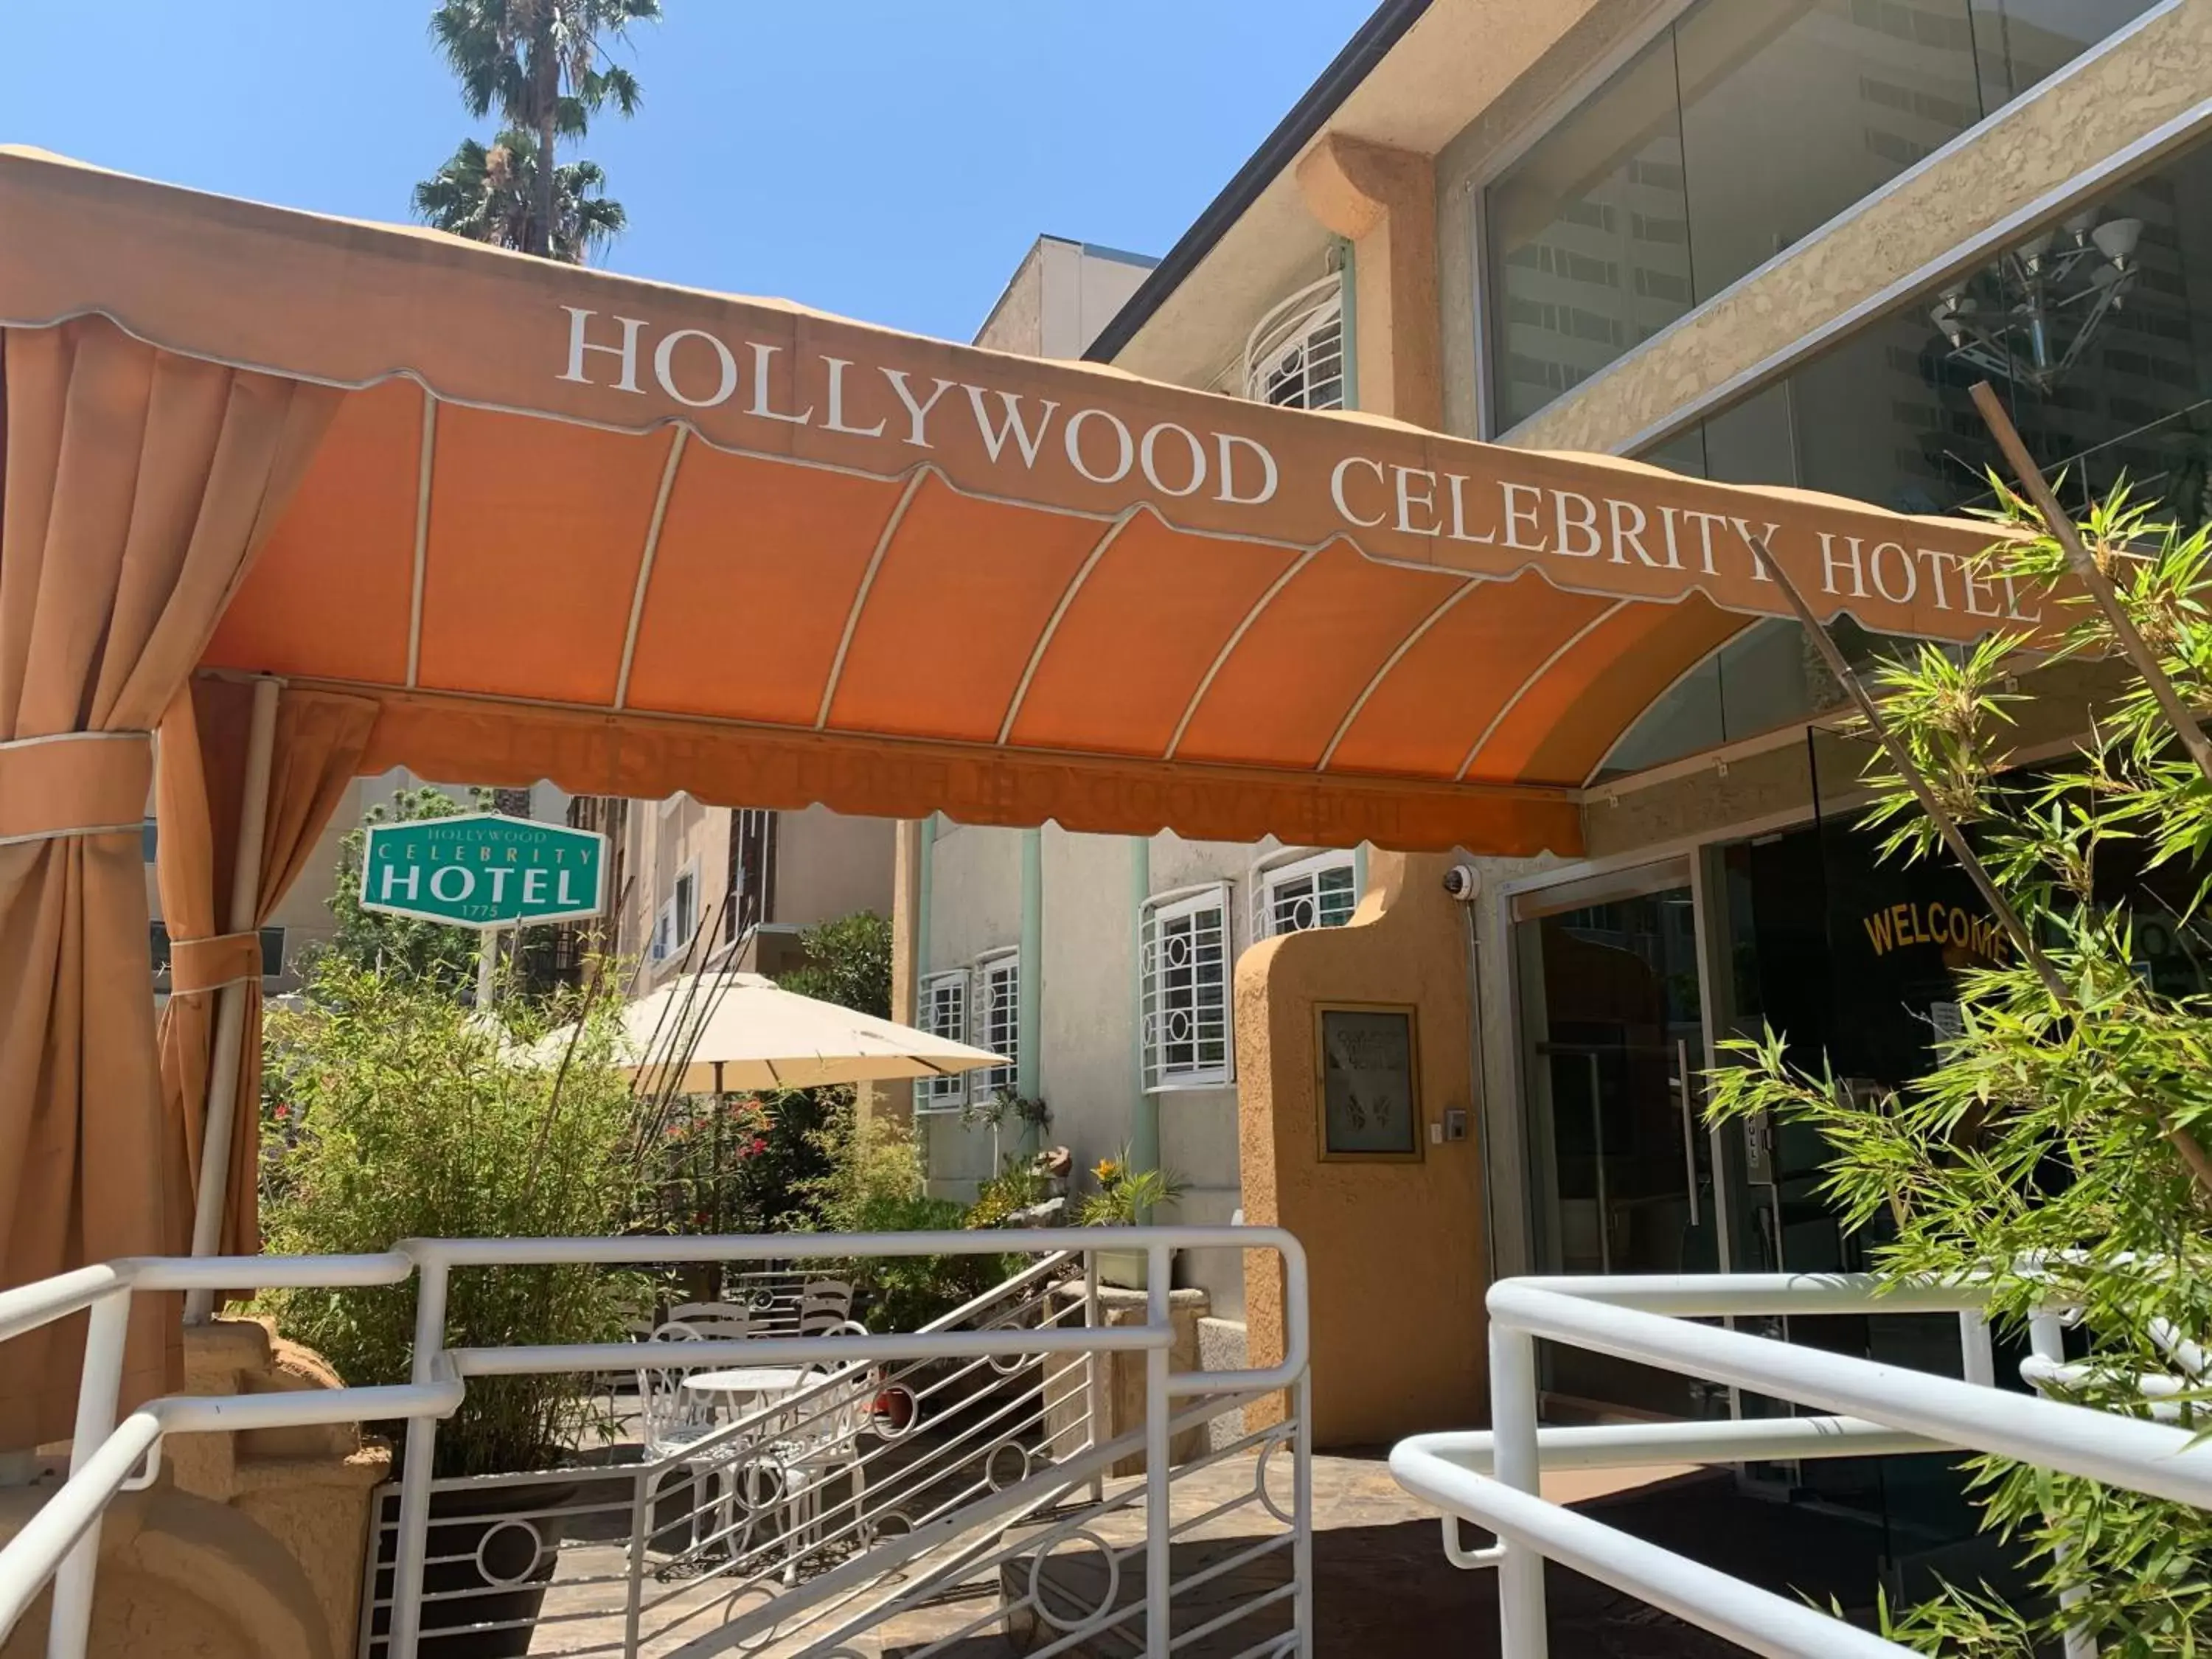 Property building in Hollywood Celebrity Hotel